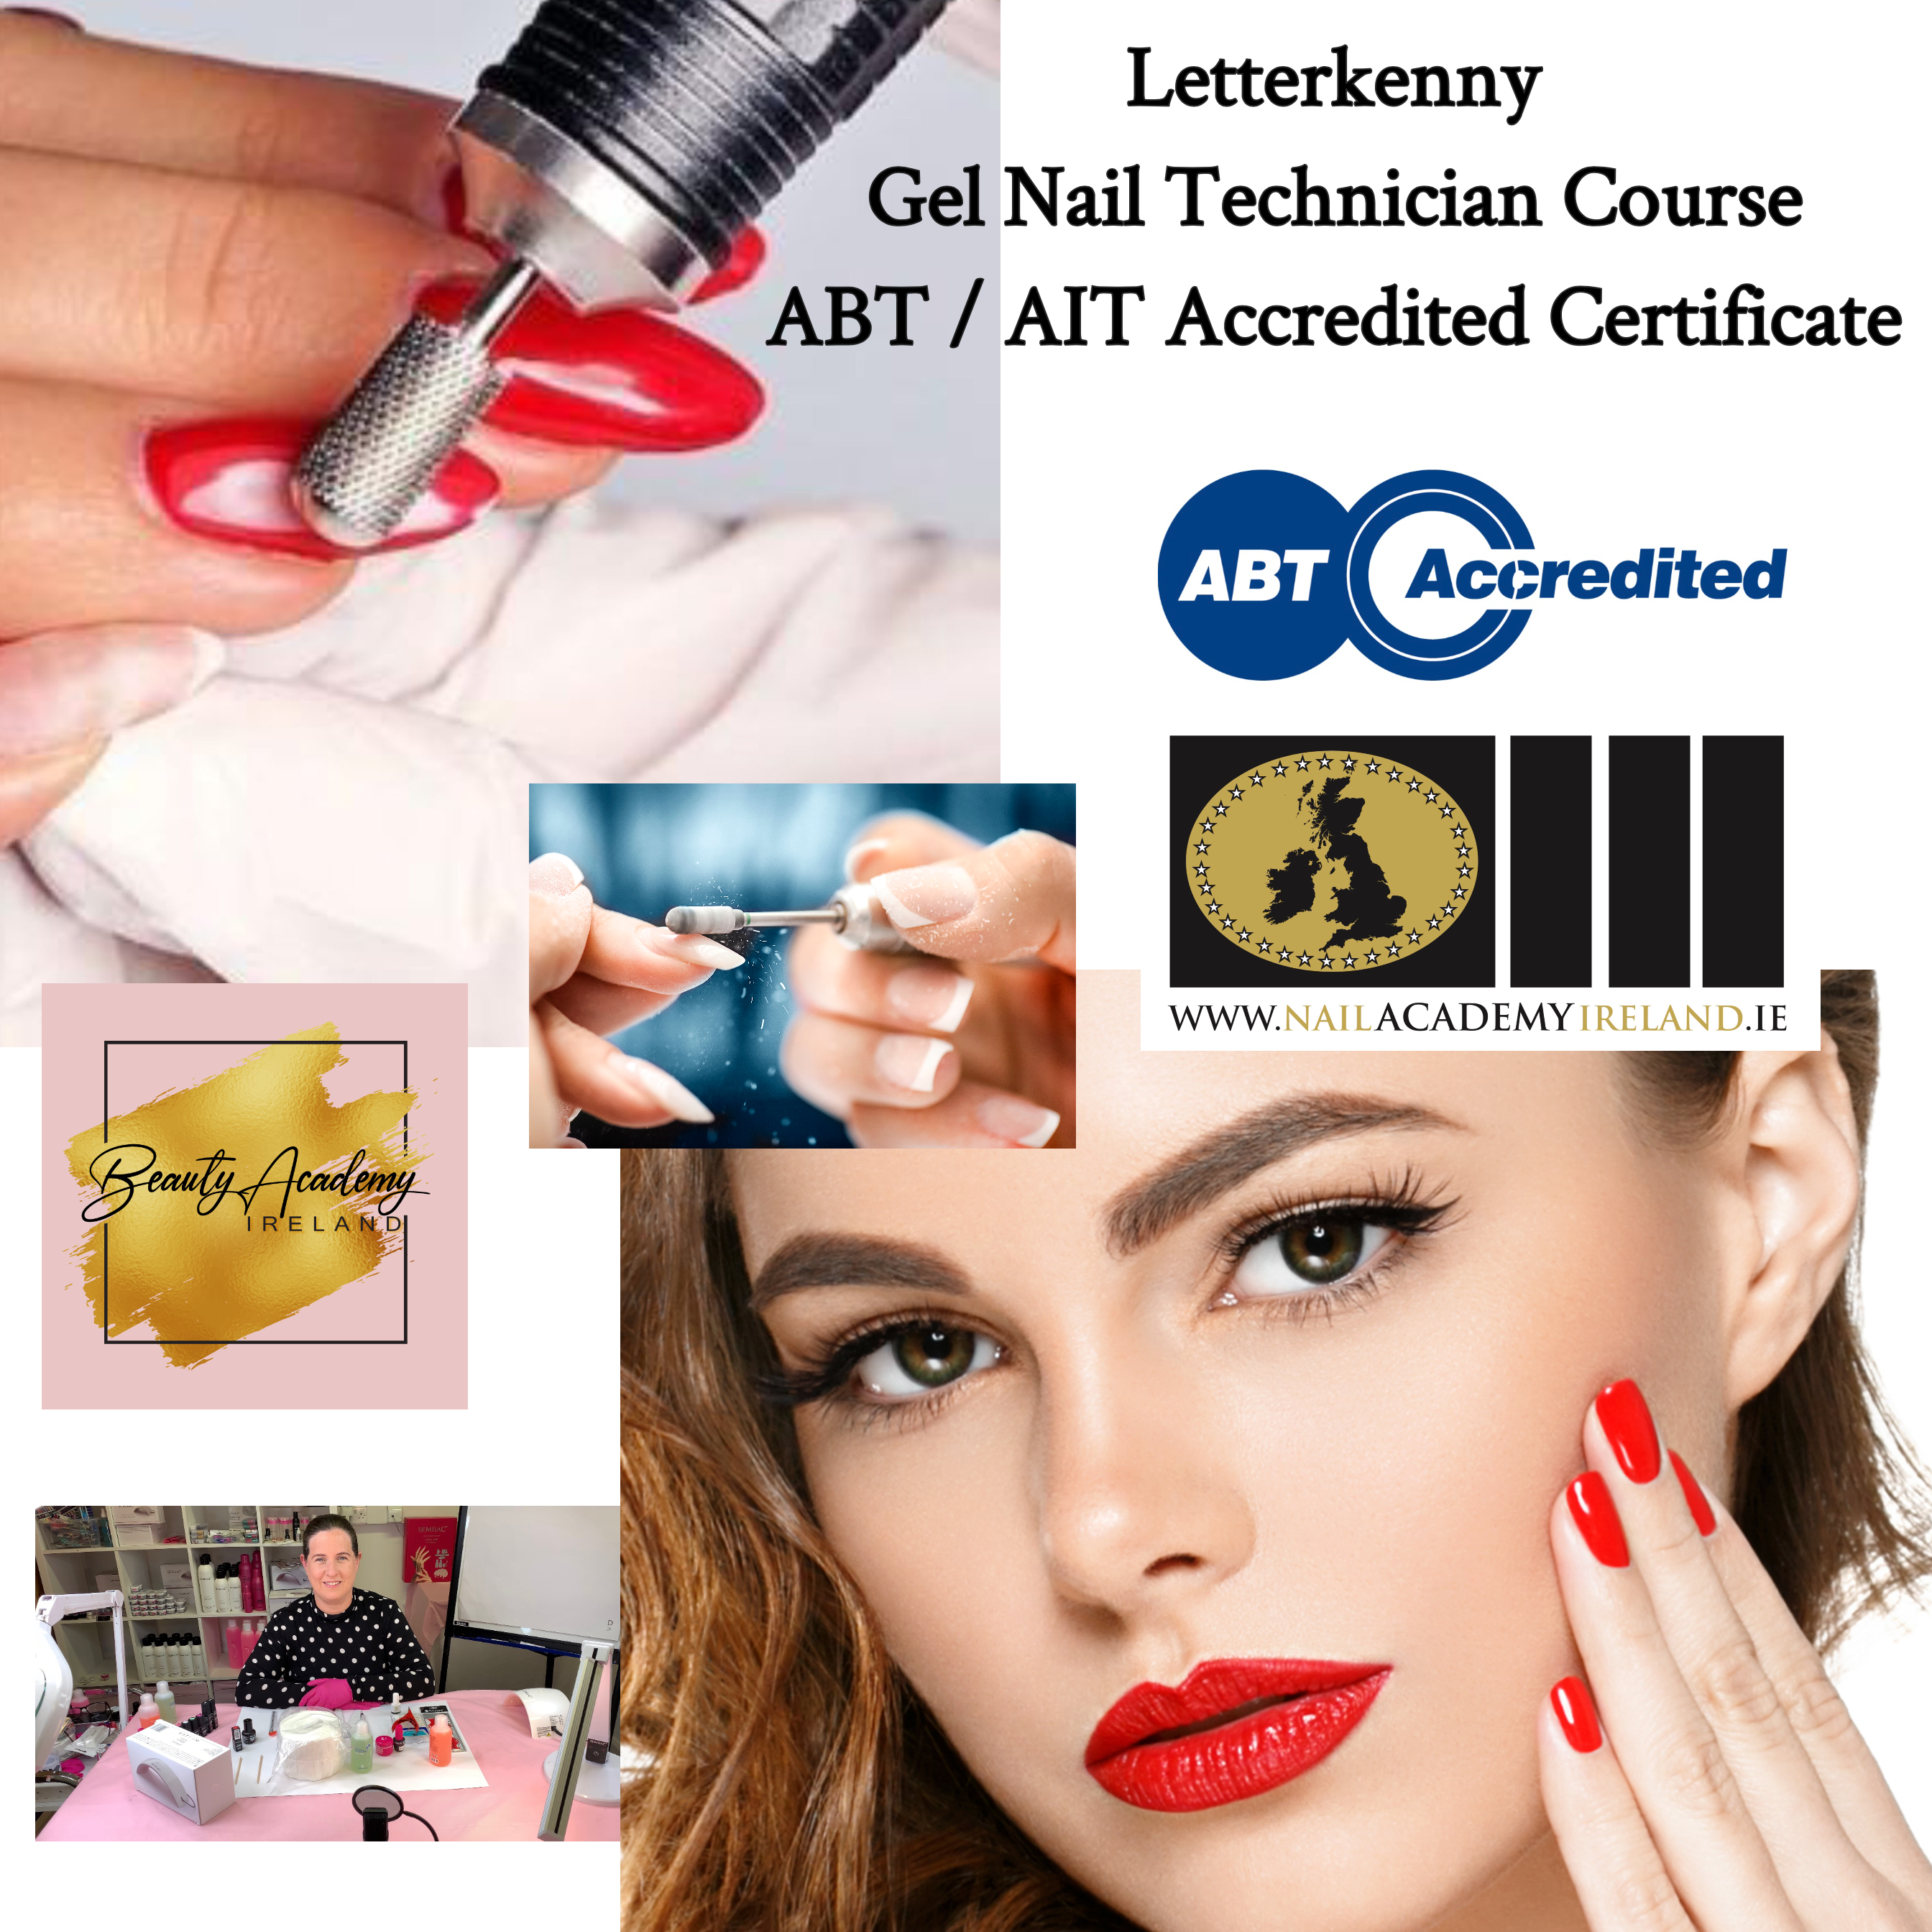 Letterkenny : Gel Nail Technician Course ( 2024) May 19 and May 26. Two Full days 10am until 5pm each day. Face to Face In Class Training. Total Cost of Course €399 ABT-AIT Accredited